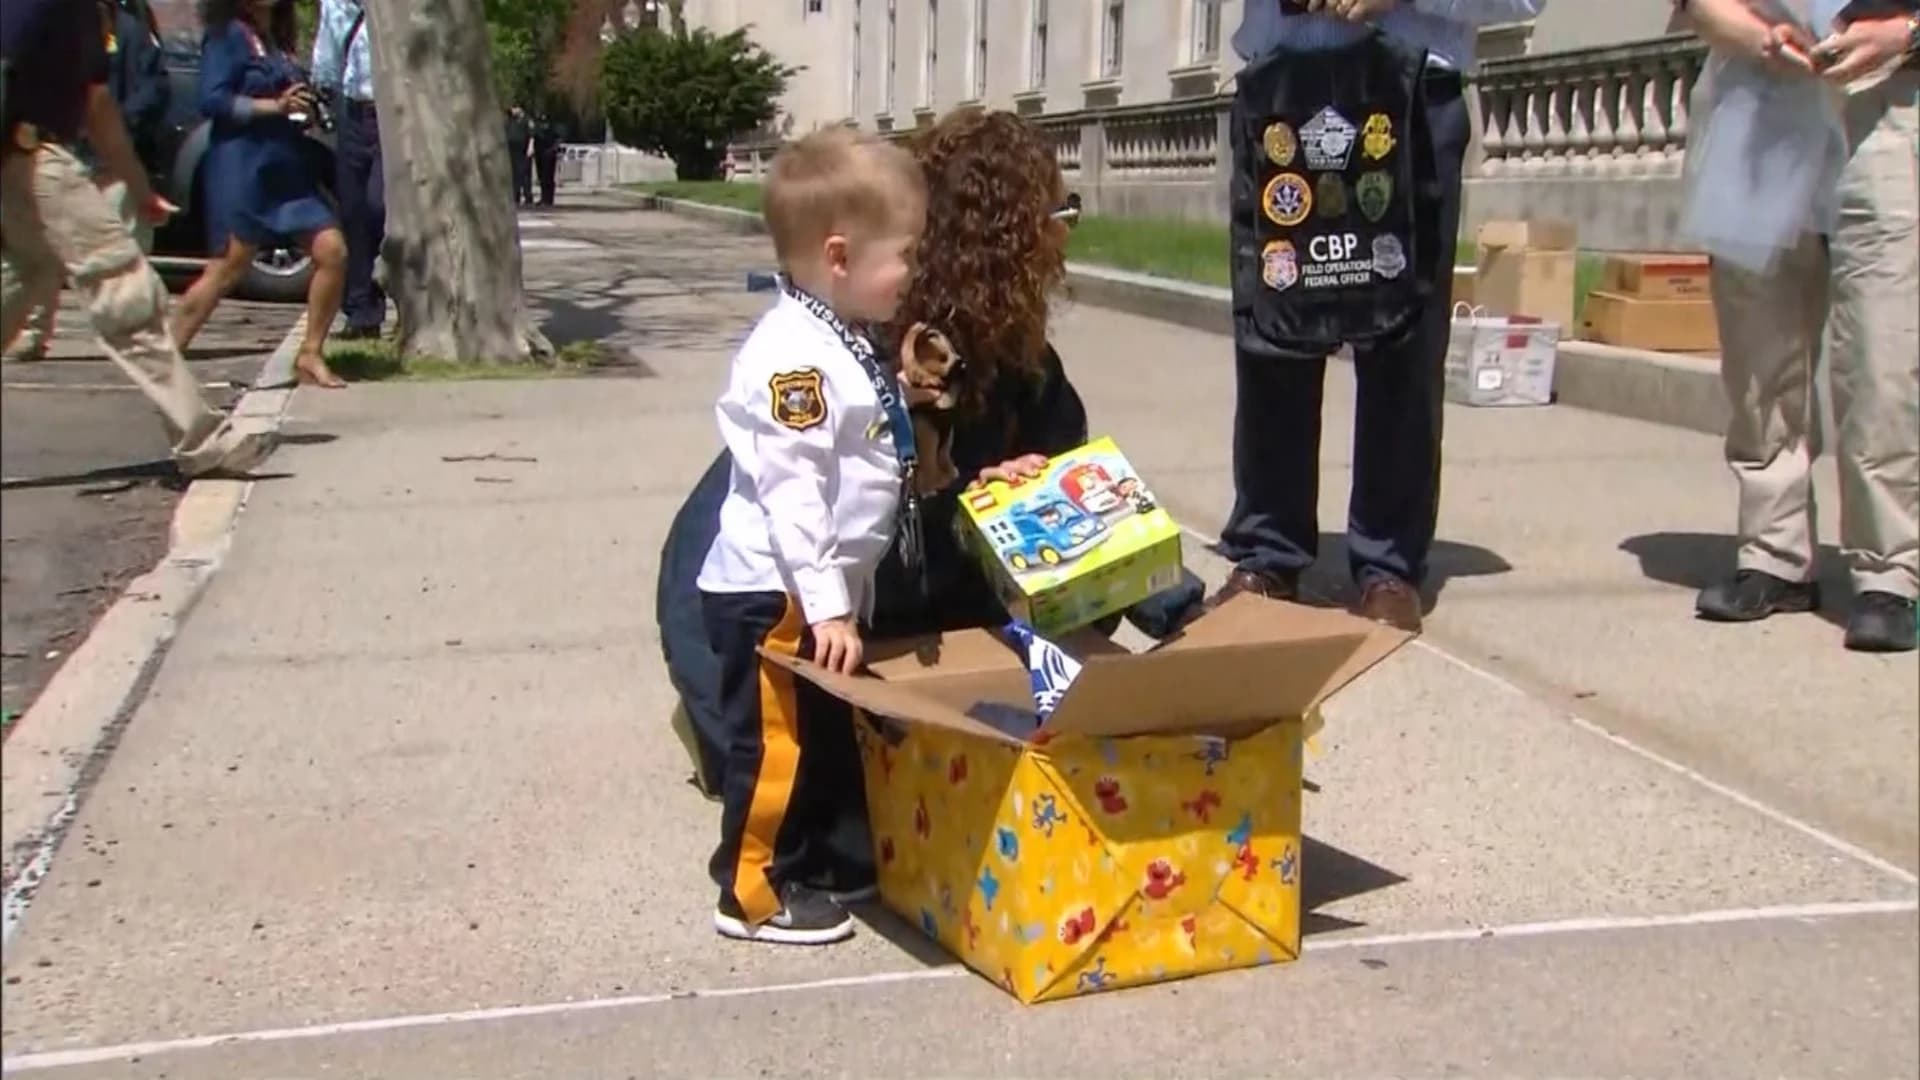 3-year-old boy with Duchenne muscular dystrophy made honorary FBI agent